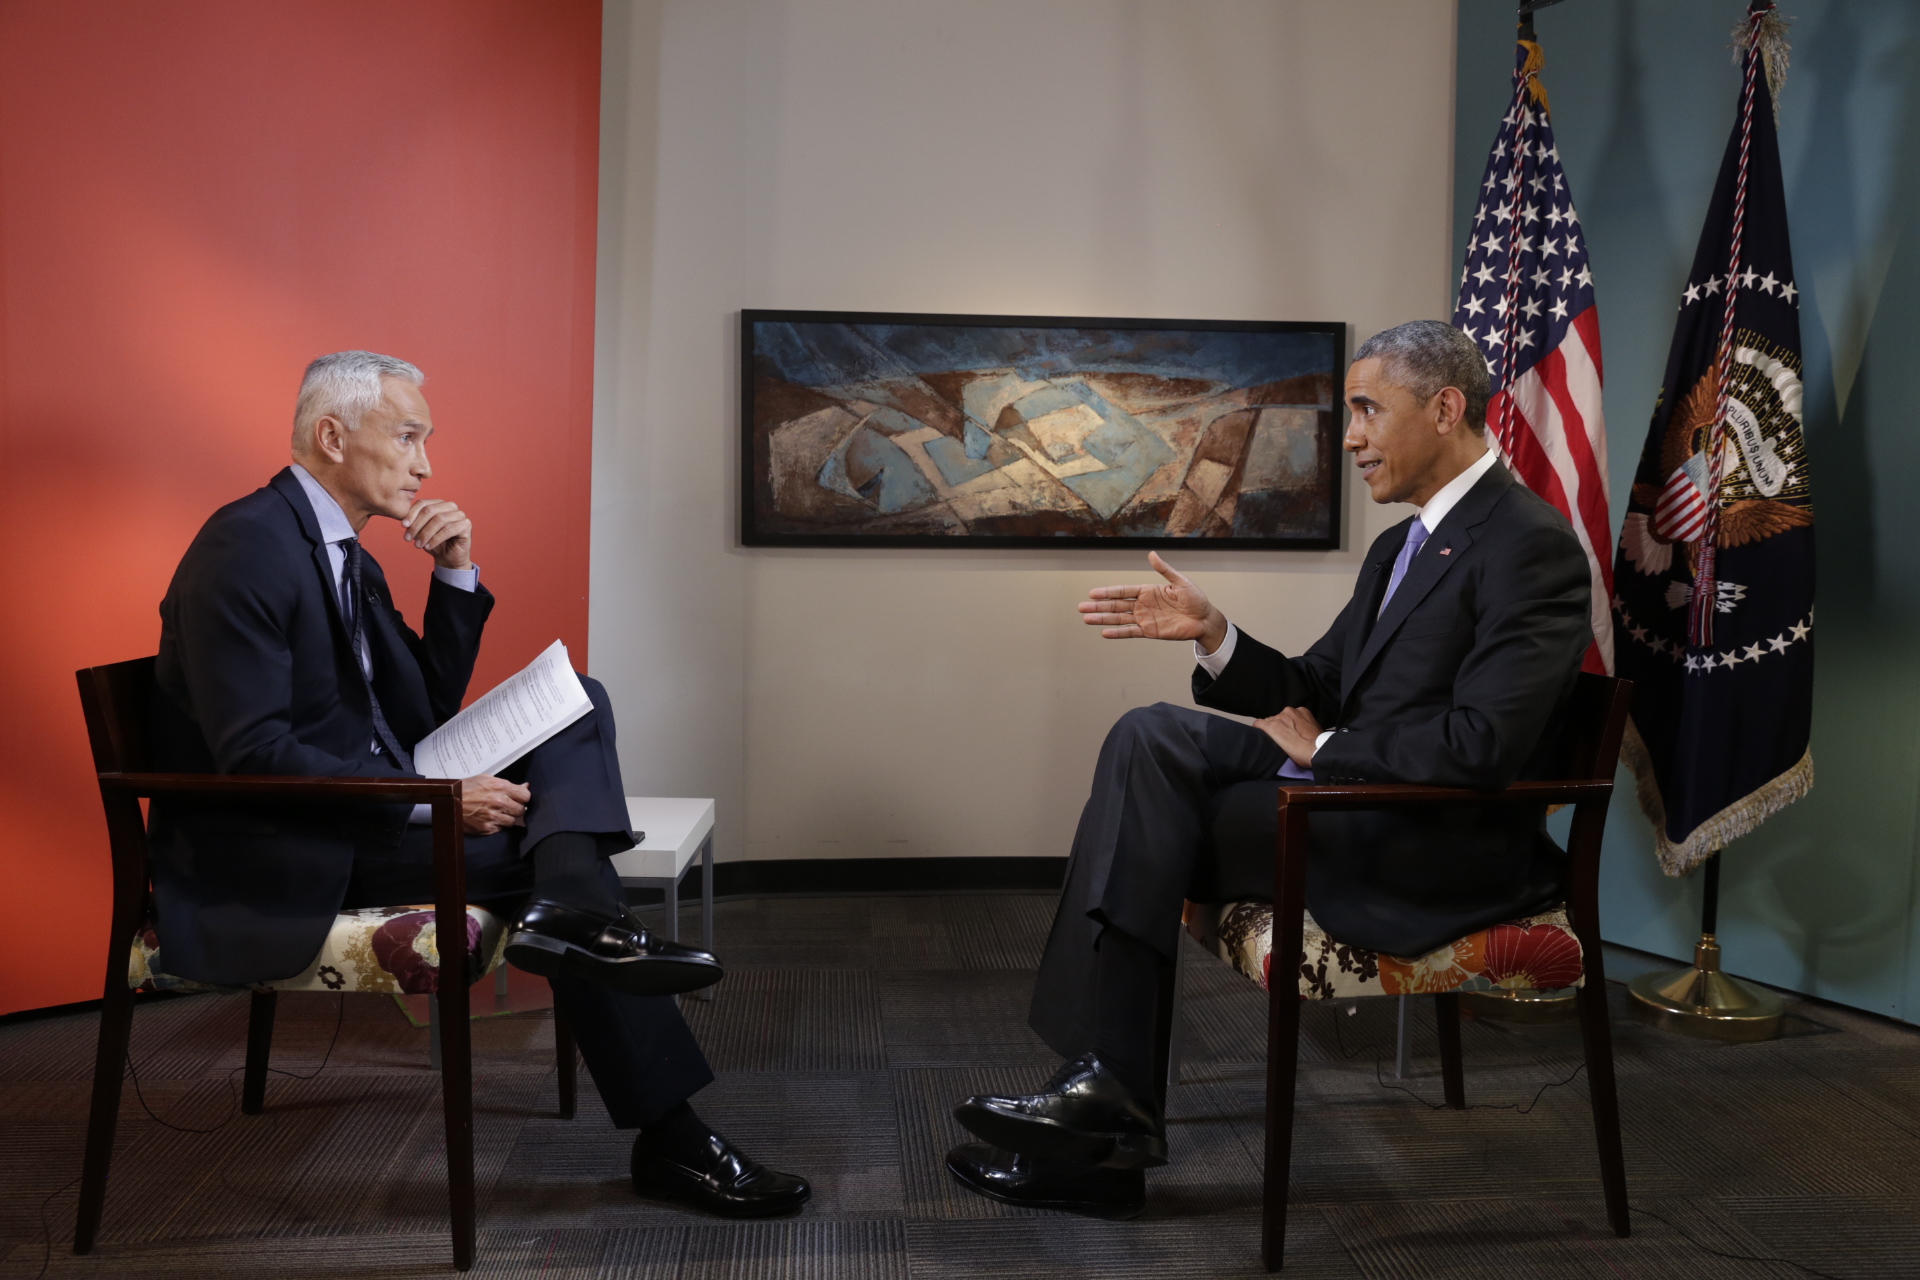 President Obama Interview with Jorge Ramos